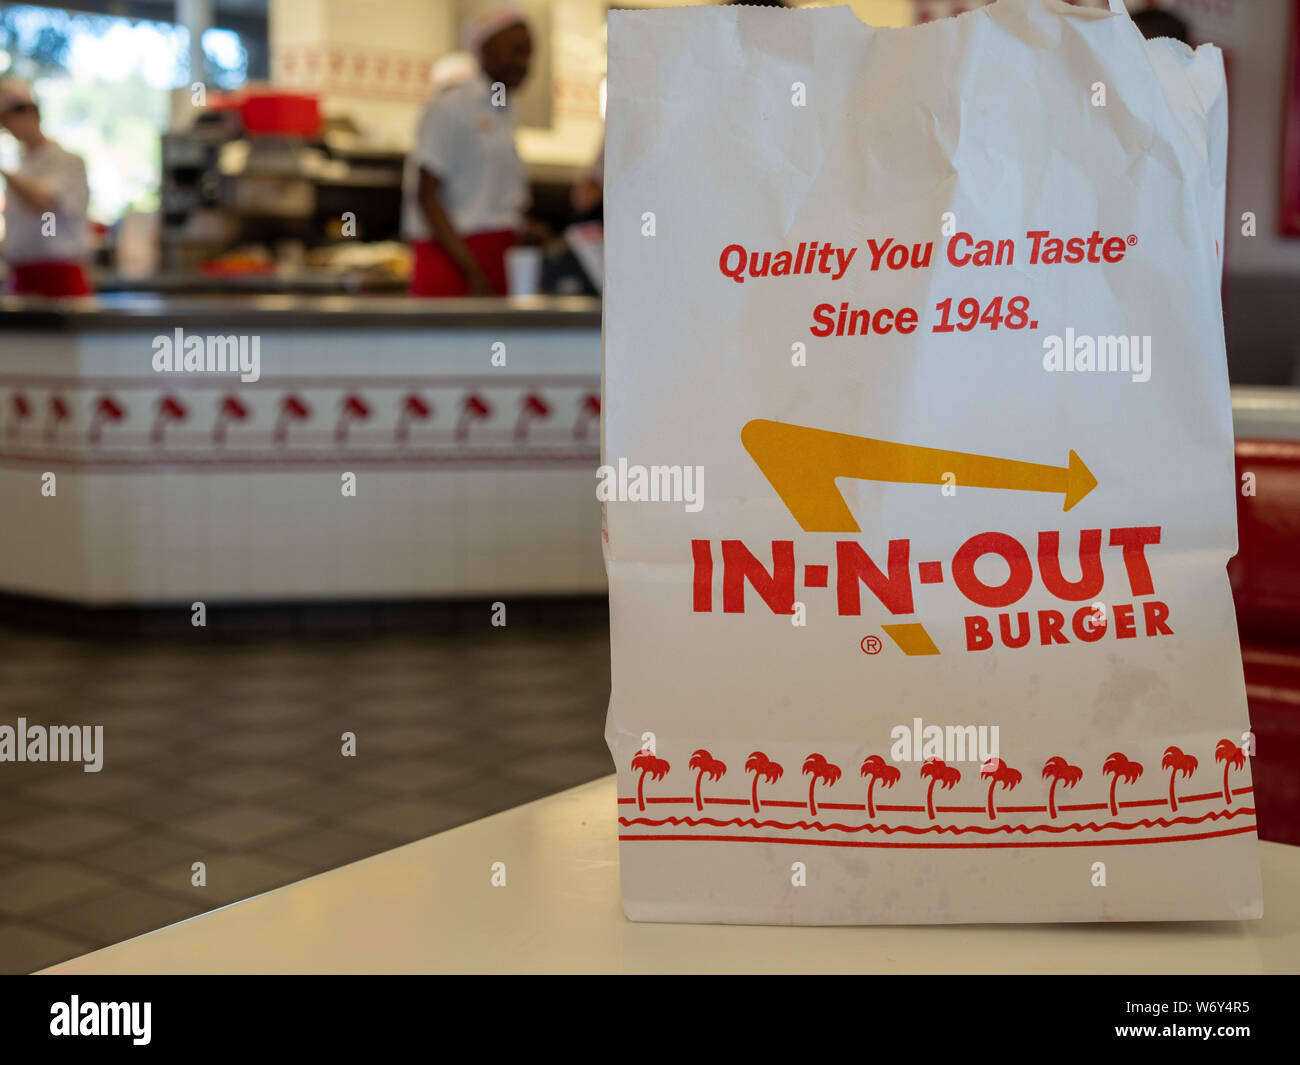 In-n-out Burger chain bag sitting in restaurant location. Slogan and logo Stock Photo